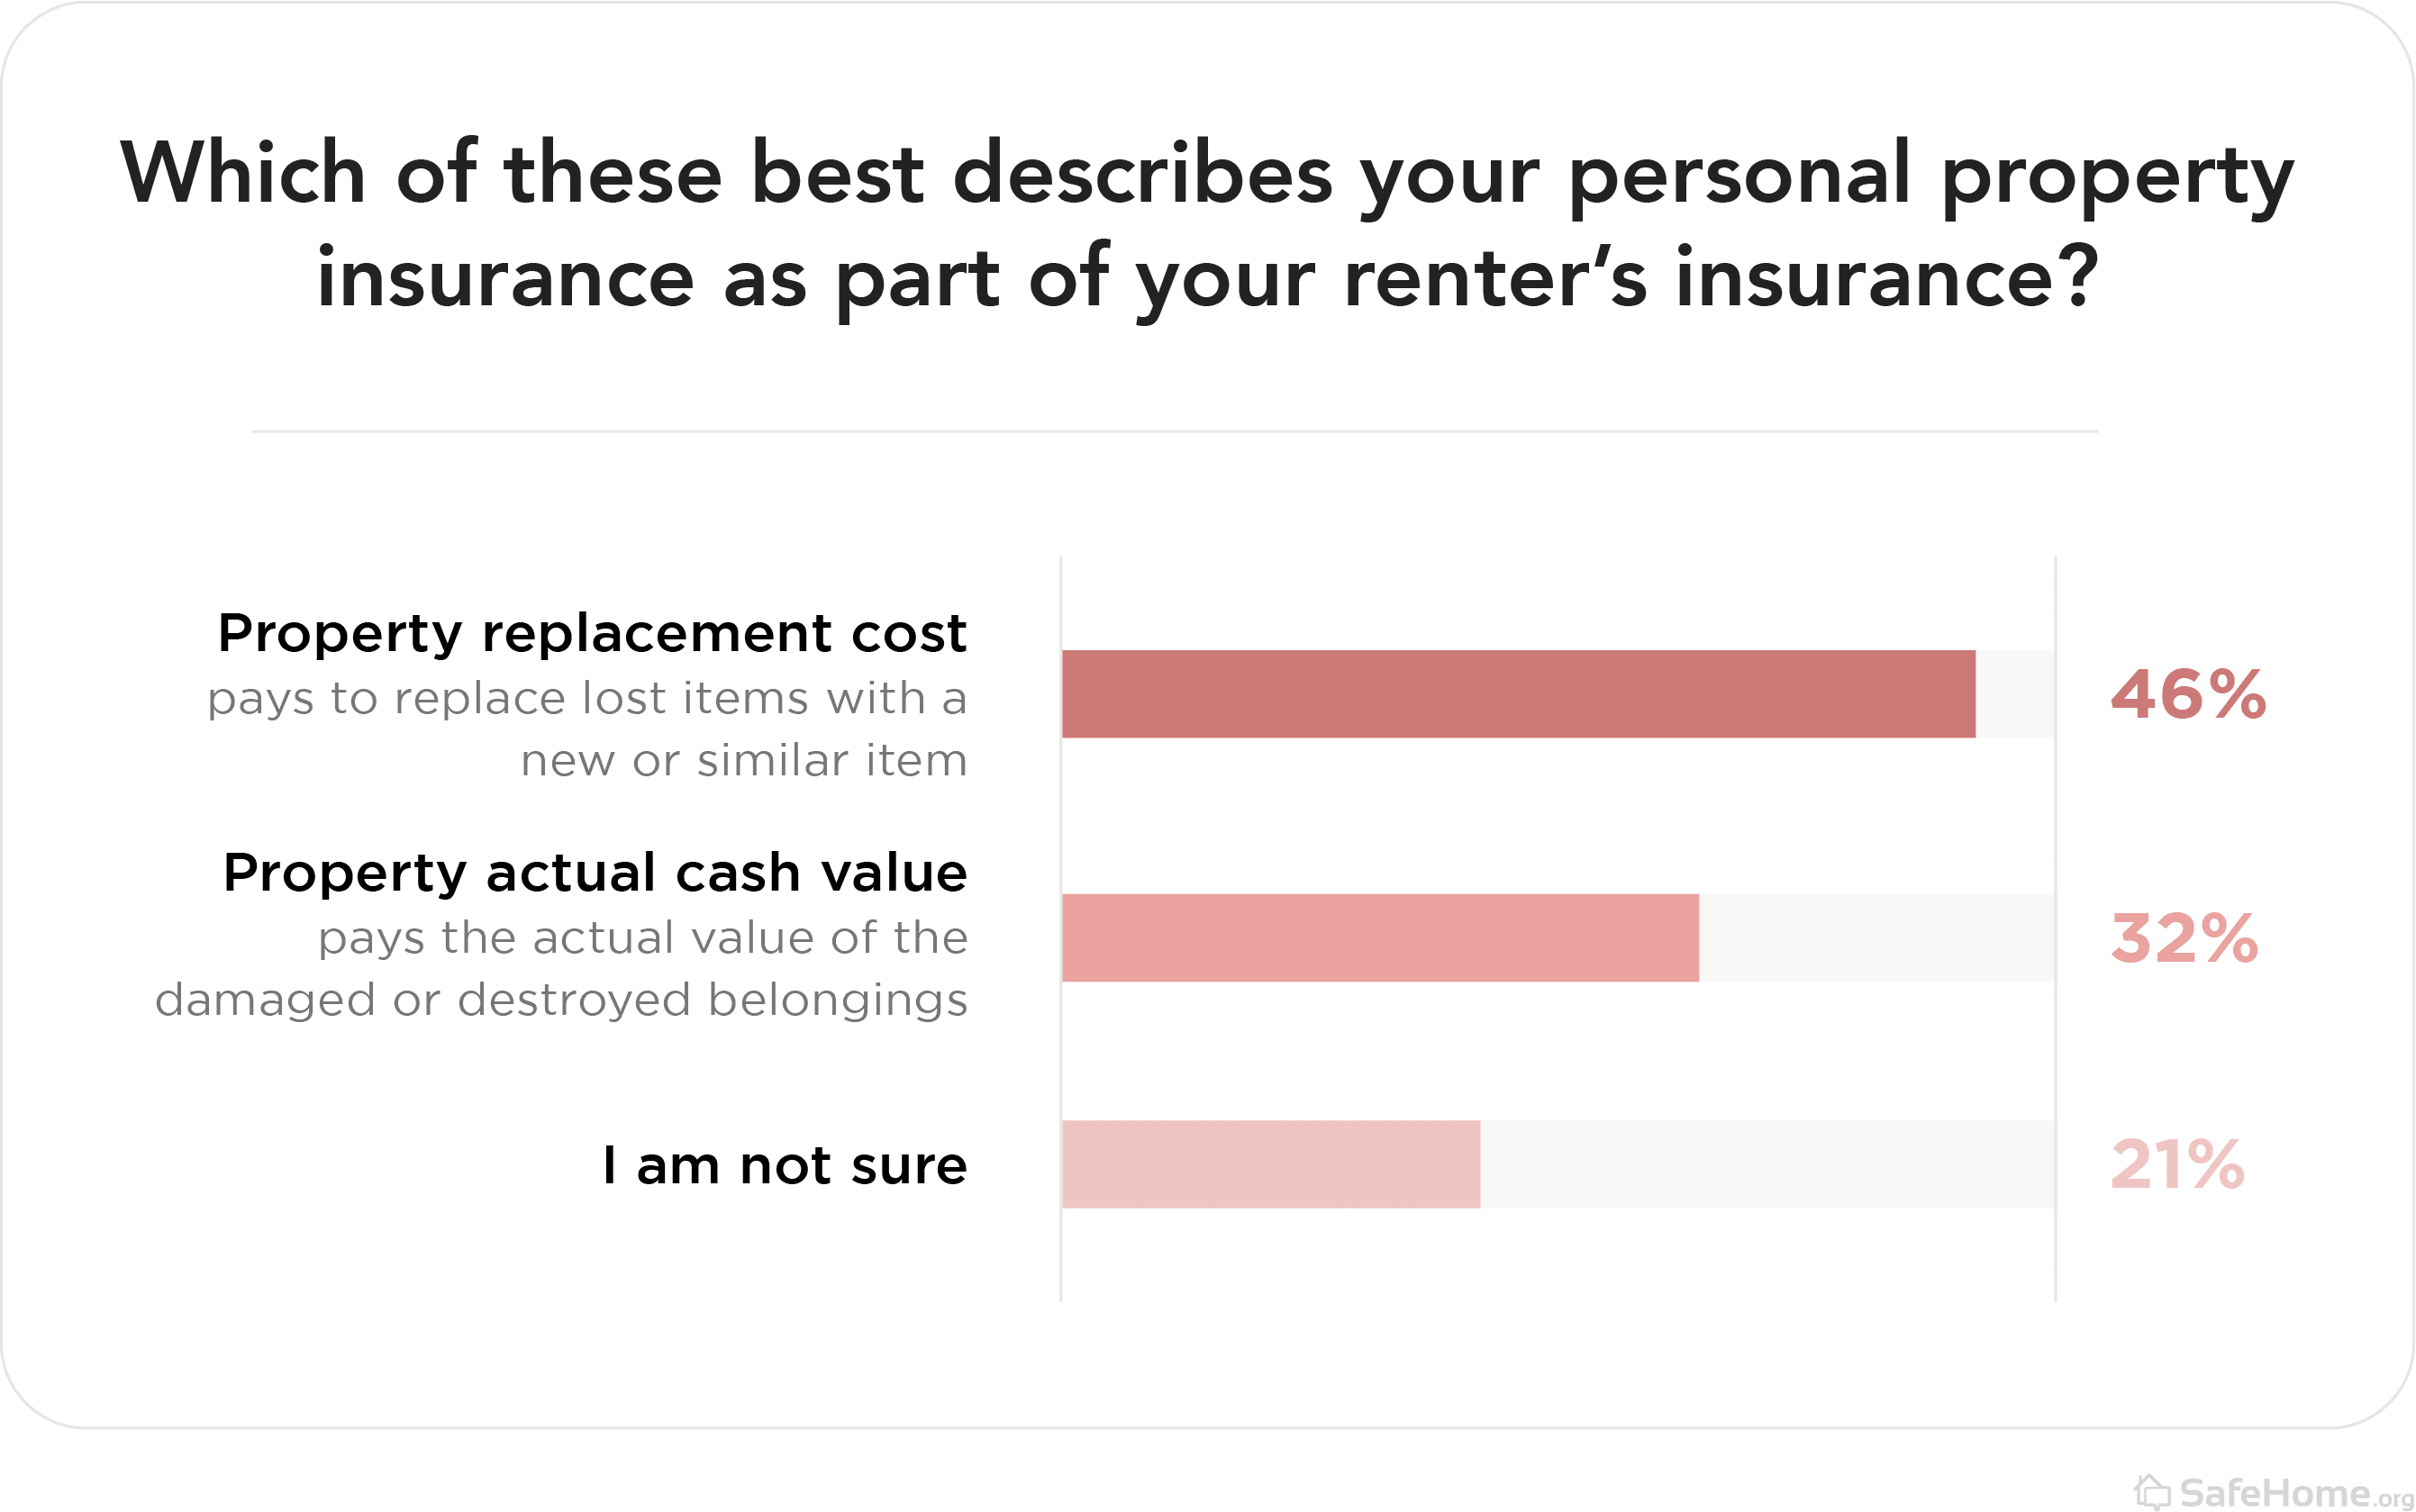 Which of these best describes your personal property insurance as part of your renter insurance